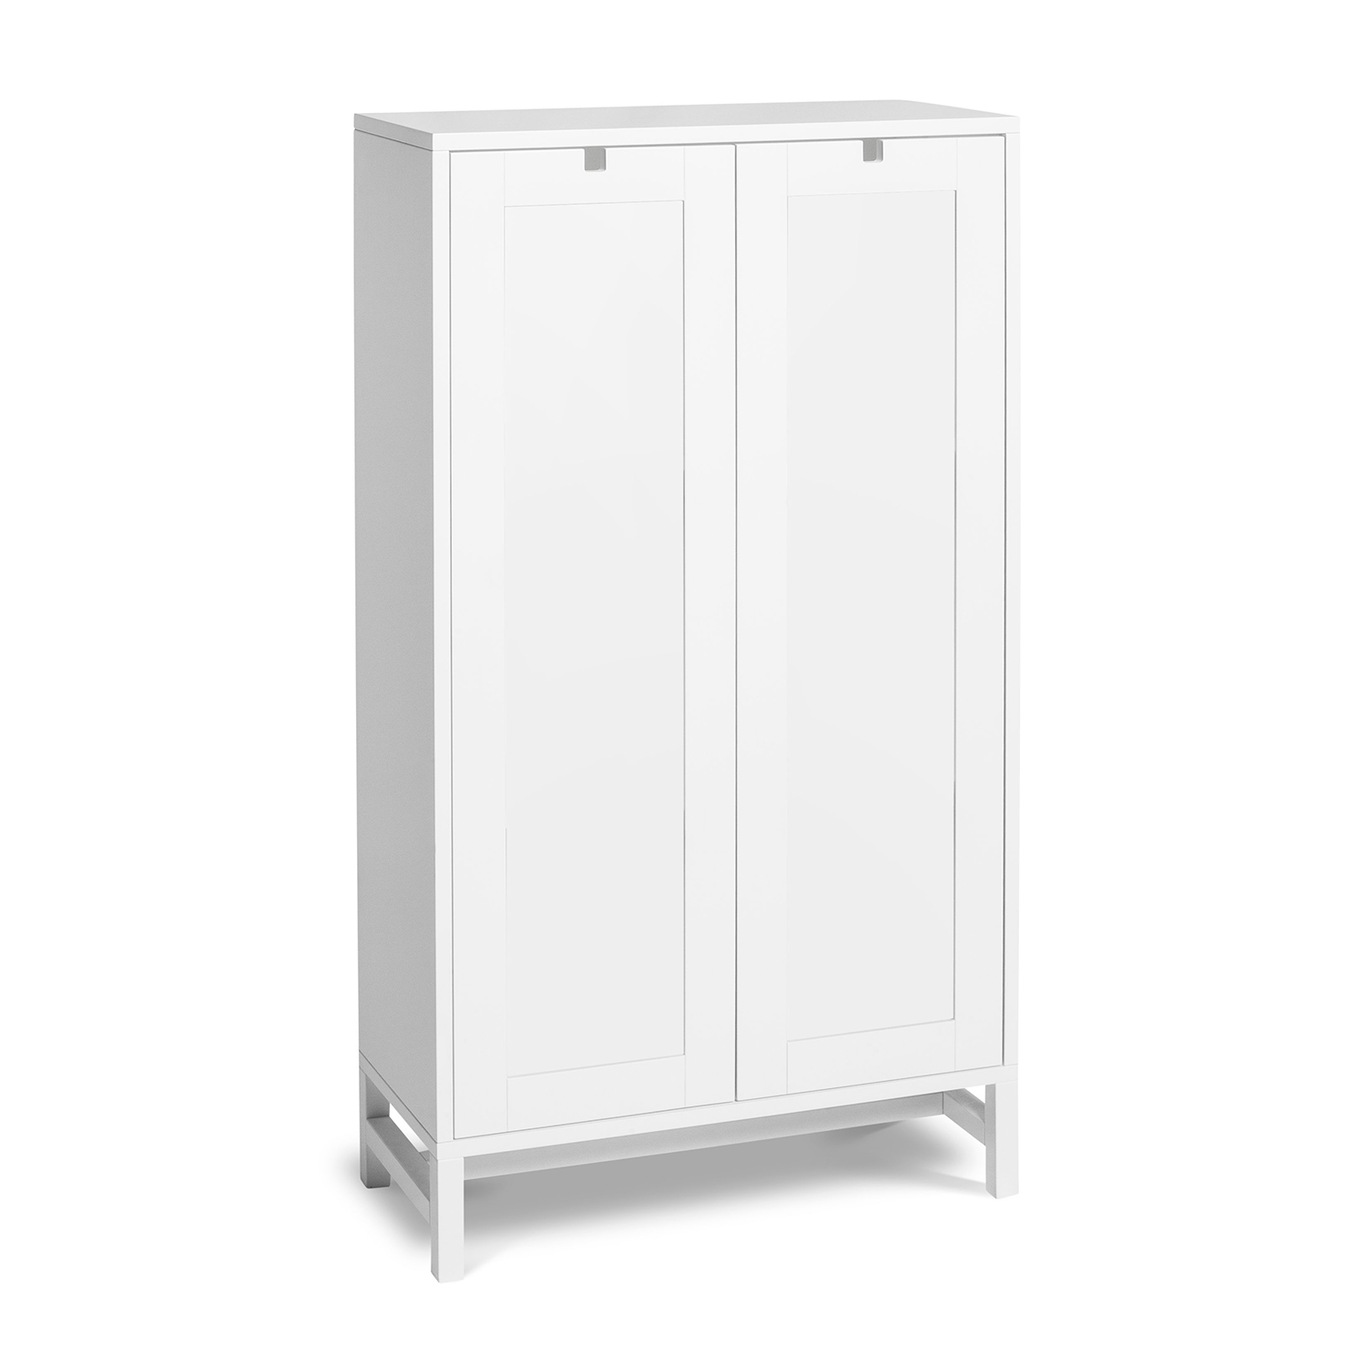 Falsterbo Cabinet 127 cm Covered Doors, White